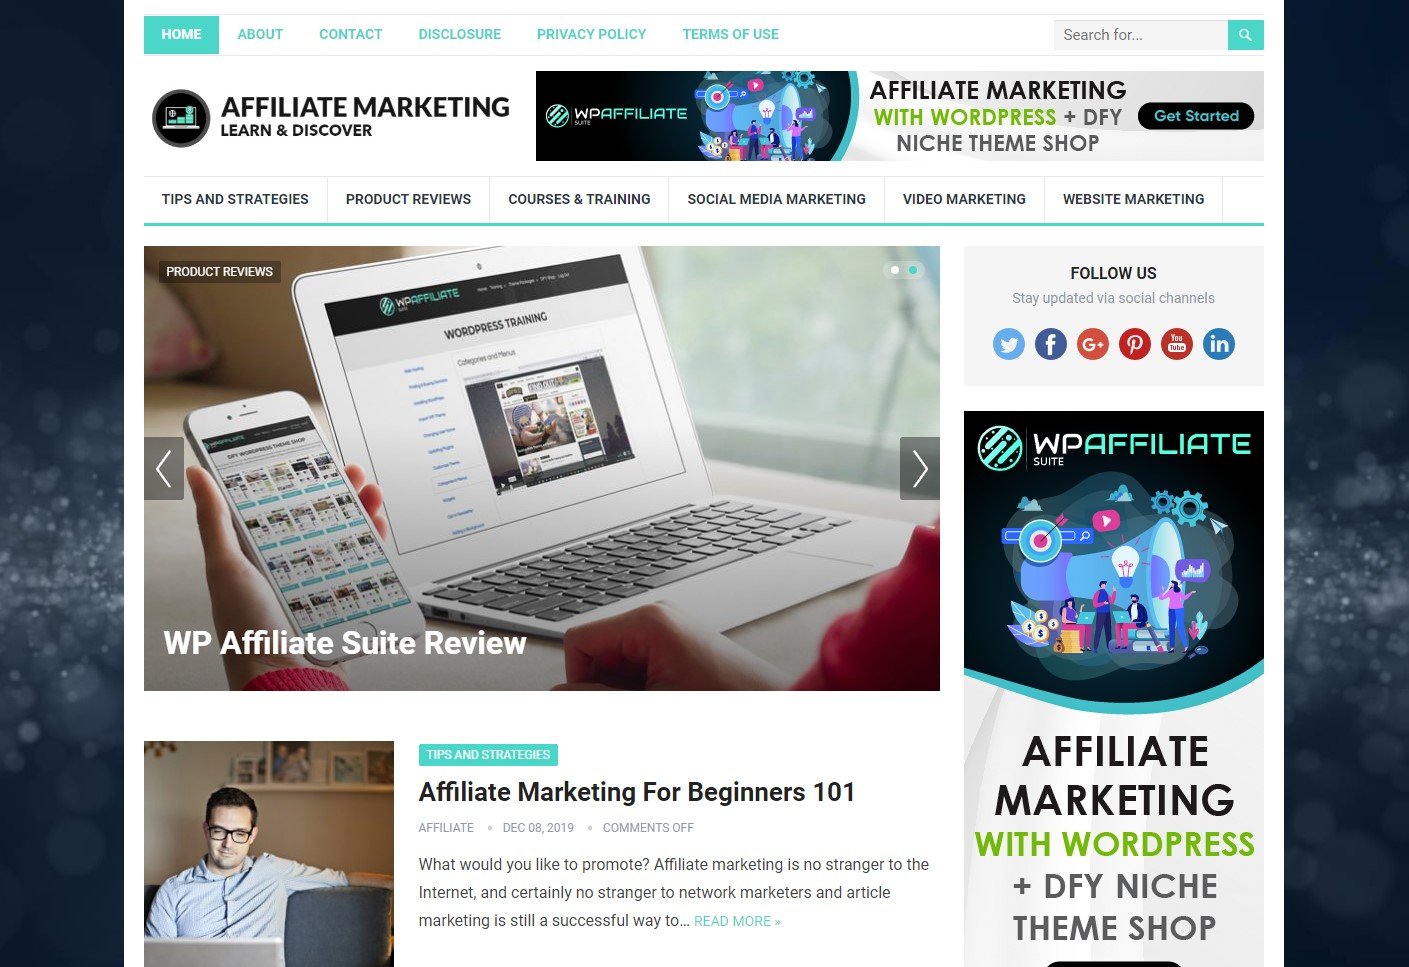 10-affiliate-marketing-tips-for-beginners-must-read